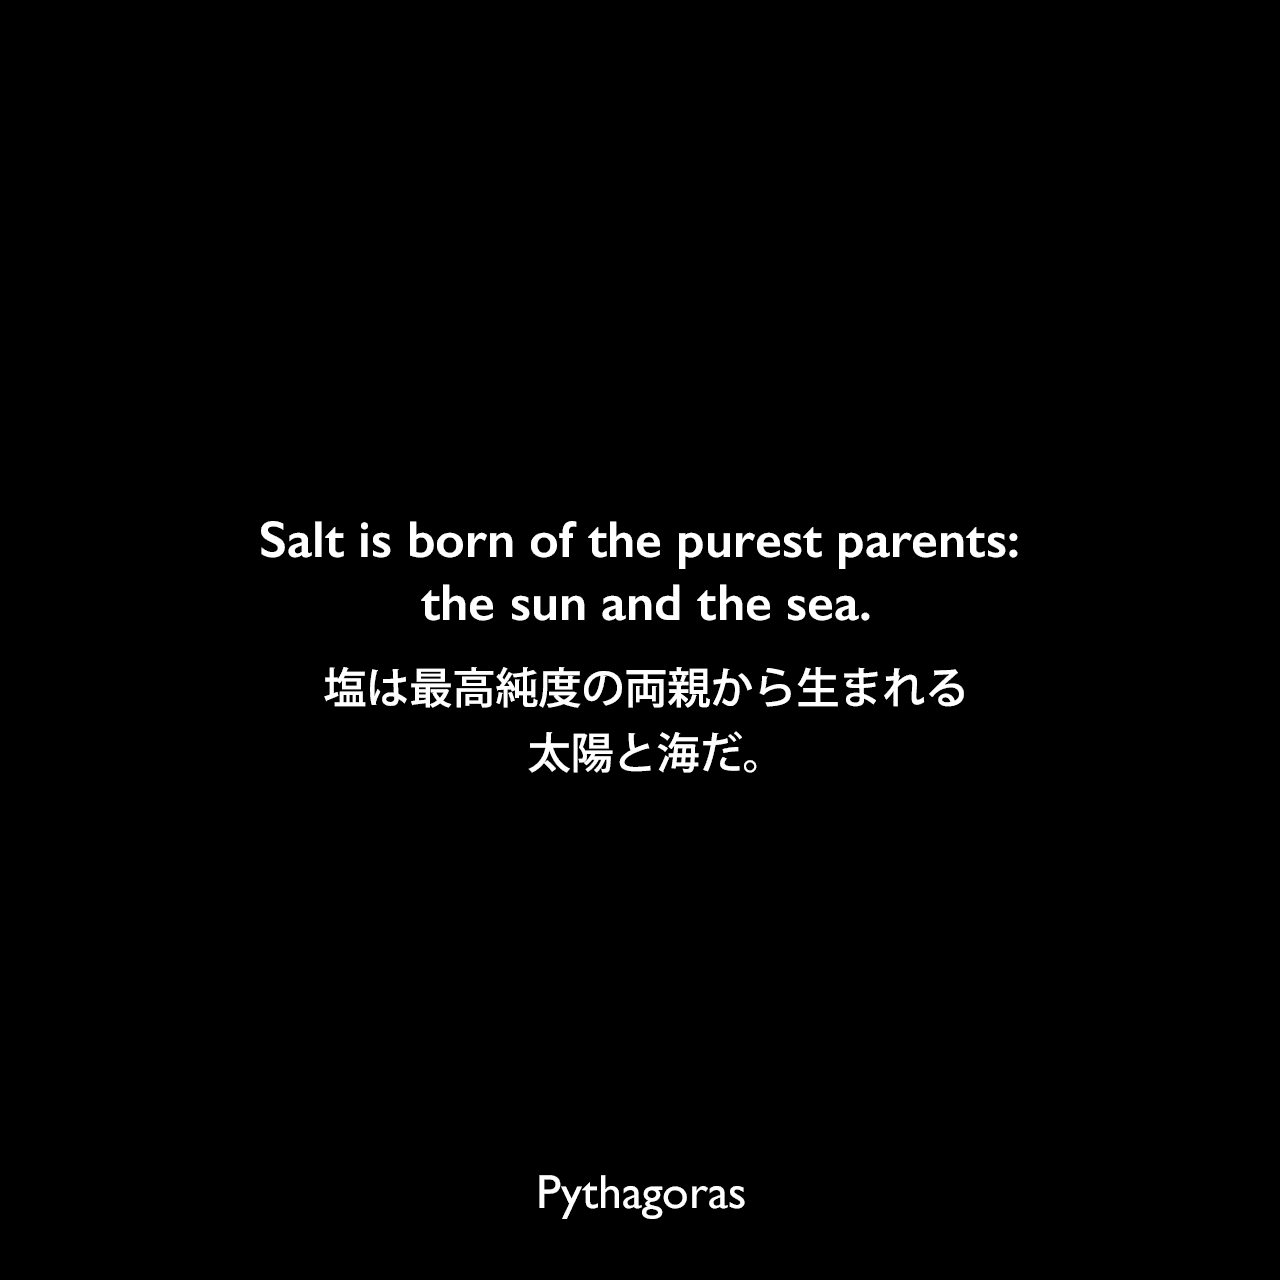 Salt is born of the purest parents: the sun and the sea.塩は最高純度の両親から生まれる、太陽と海だ。Pythagoras